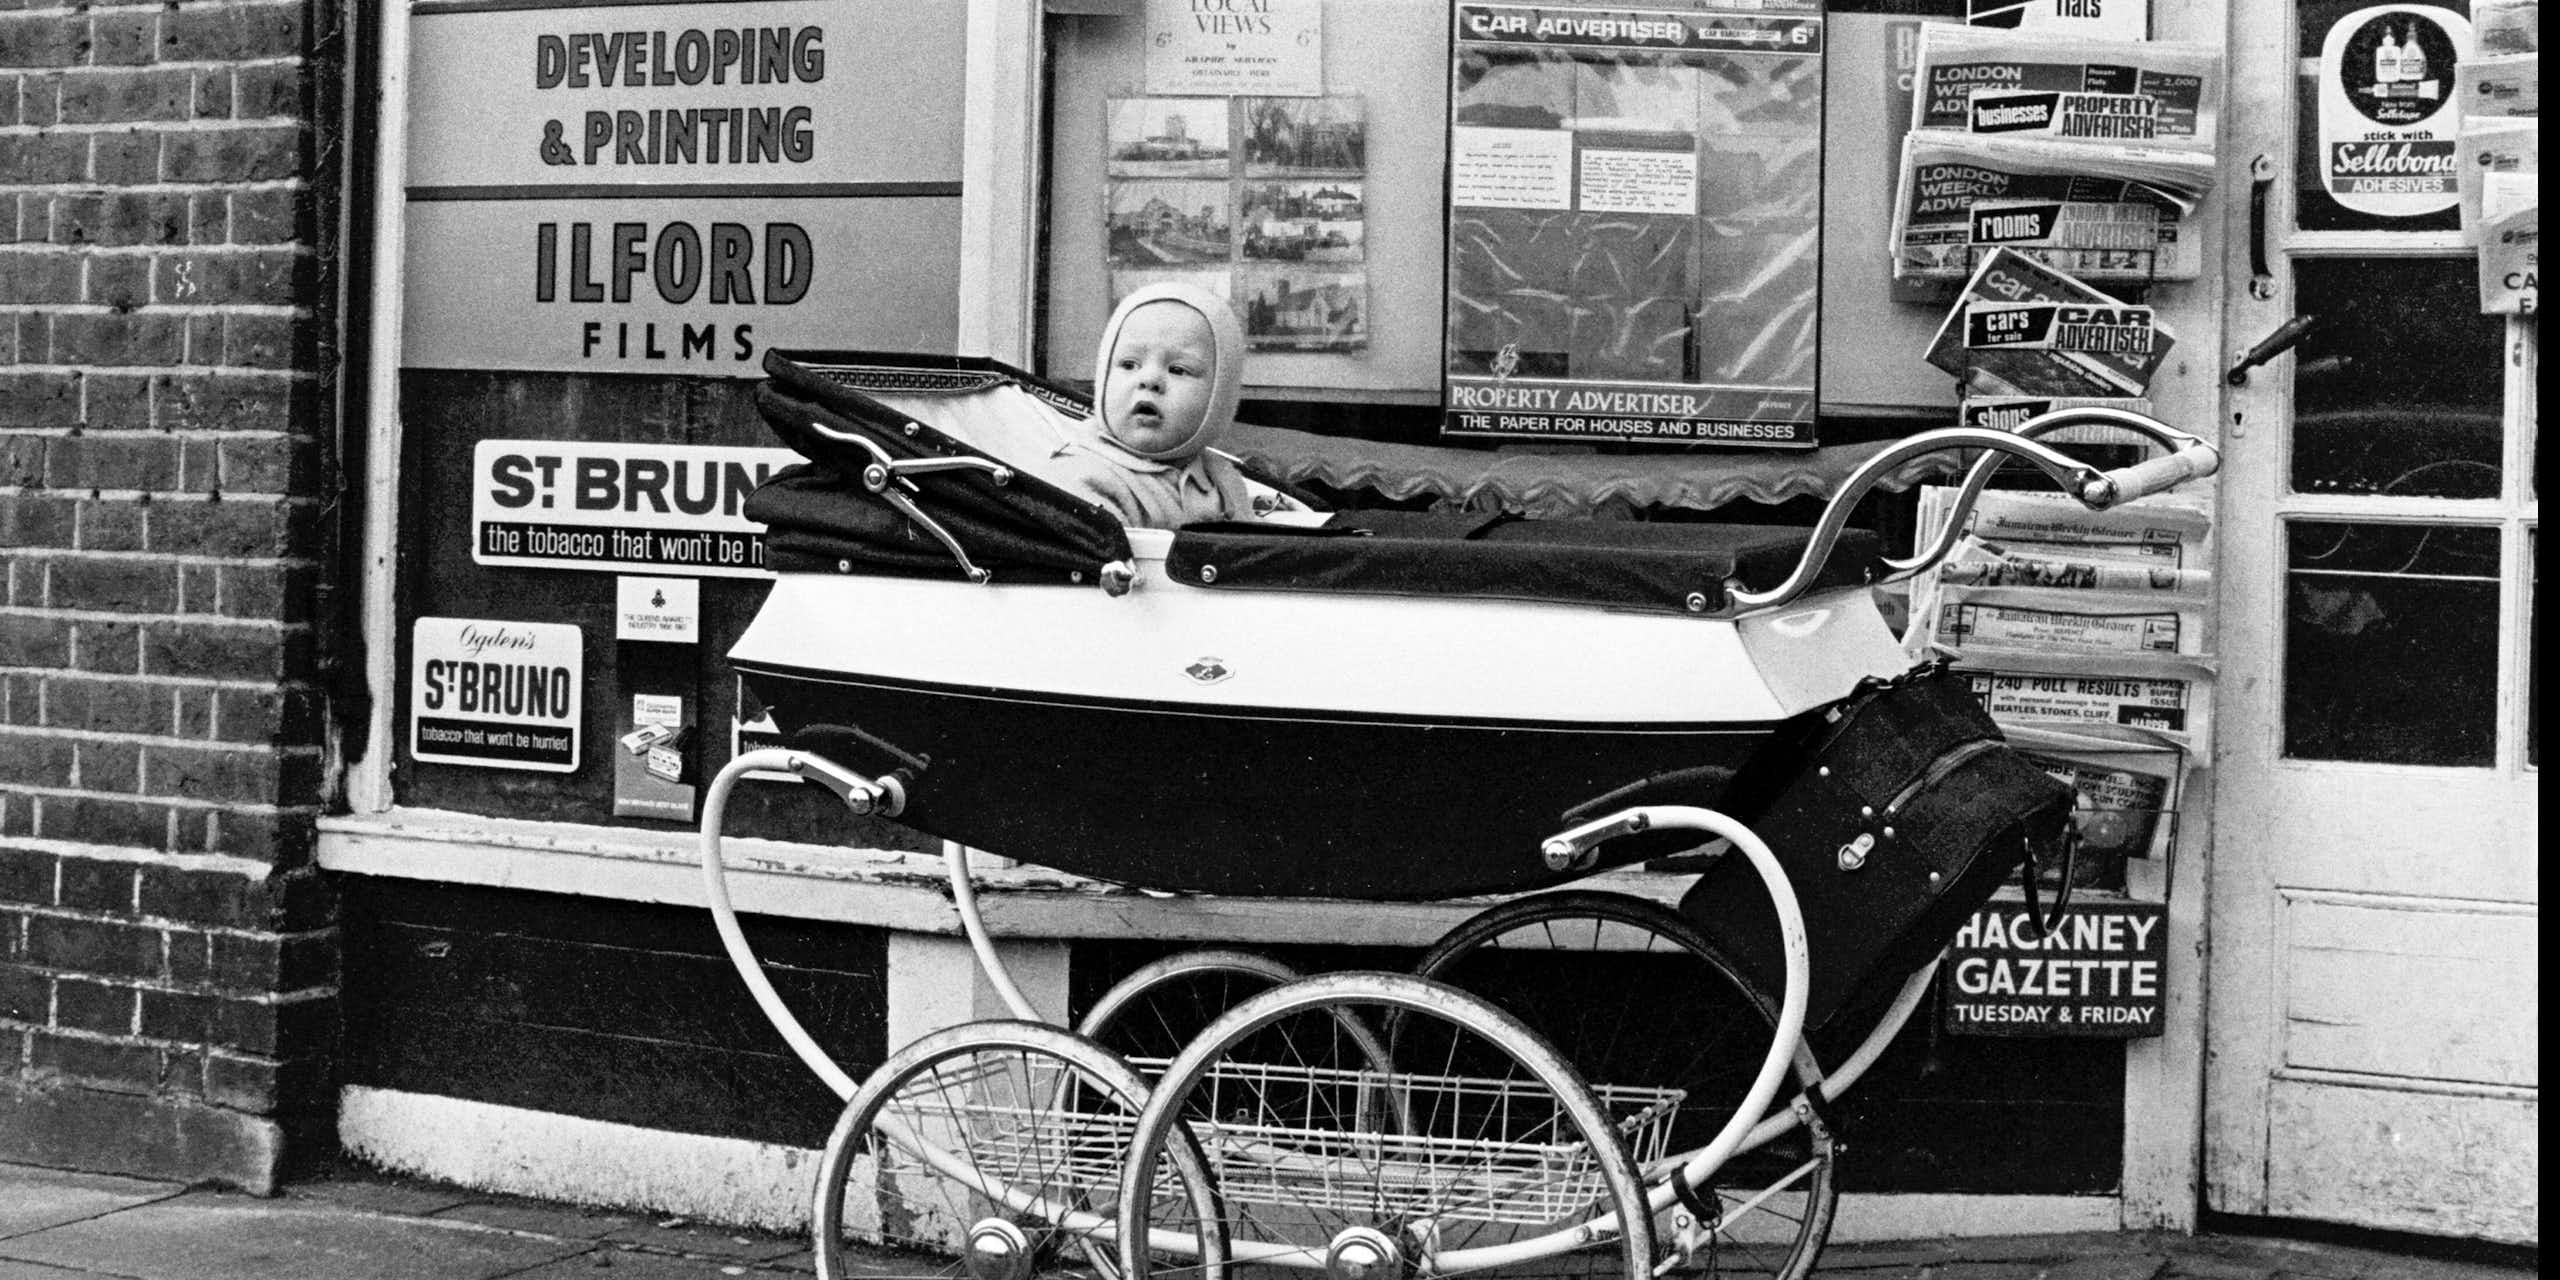 A baby in a pram in an archival black and white photograph.